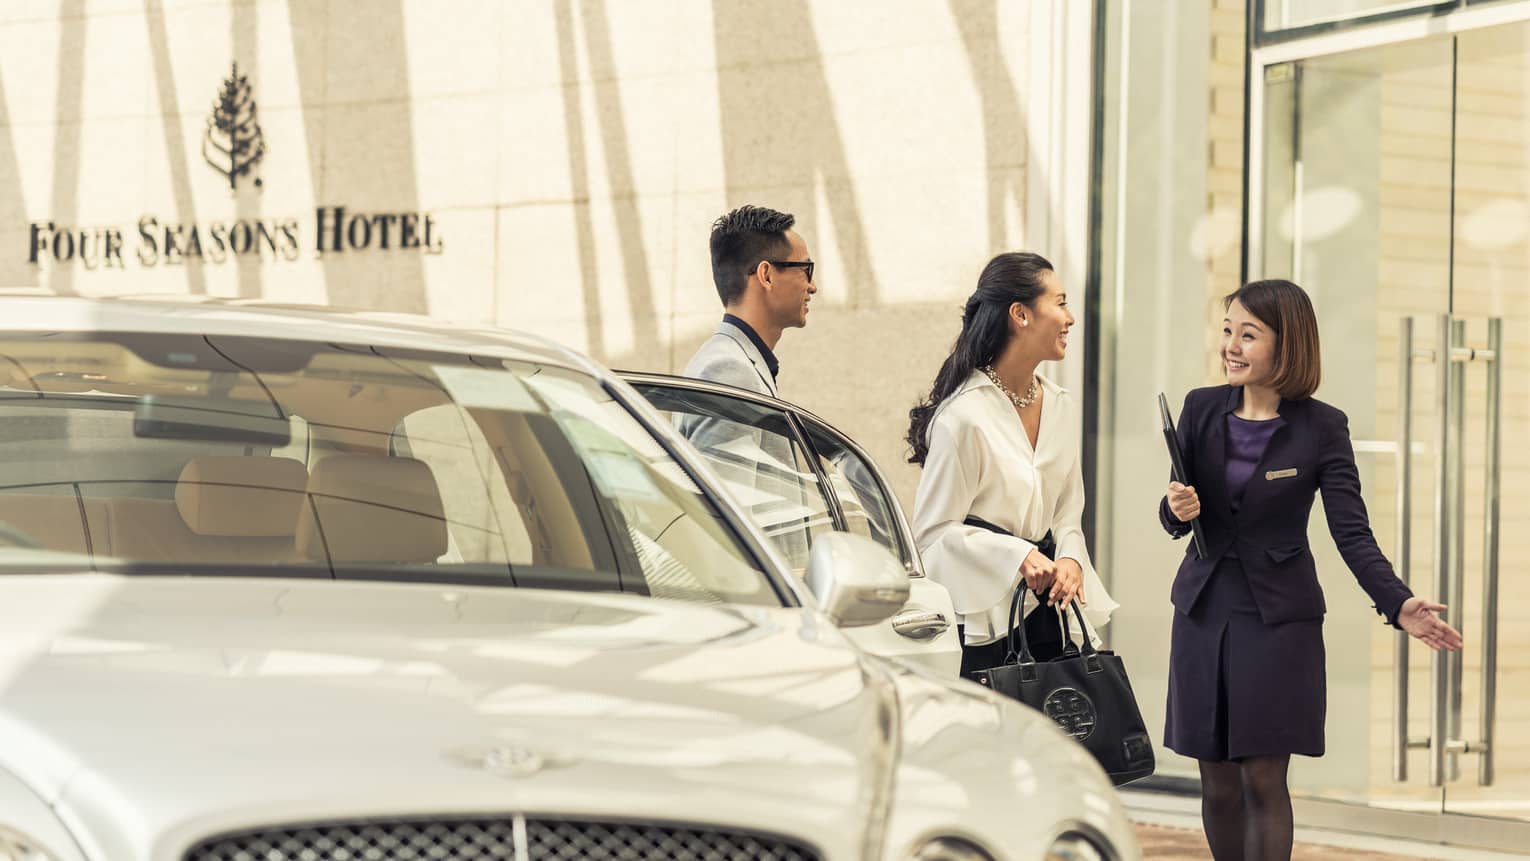 Hotel staff greets couple in front of luxury car at Four Seasons Hotel Hong Kong entrance